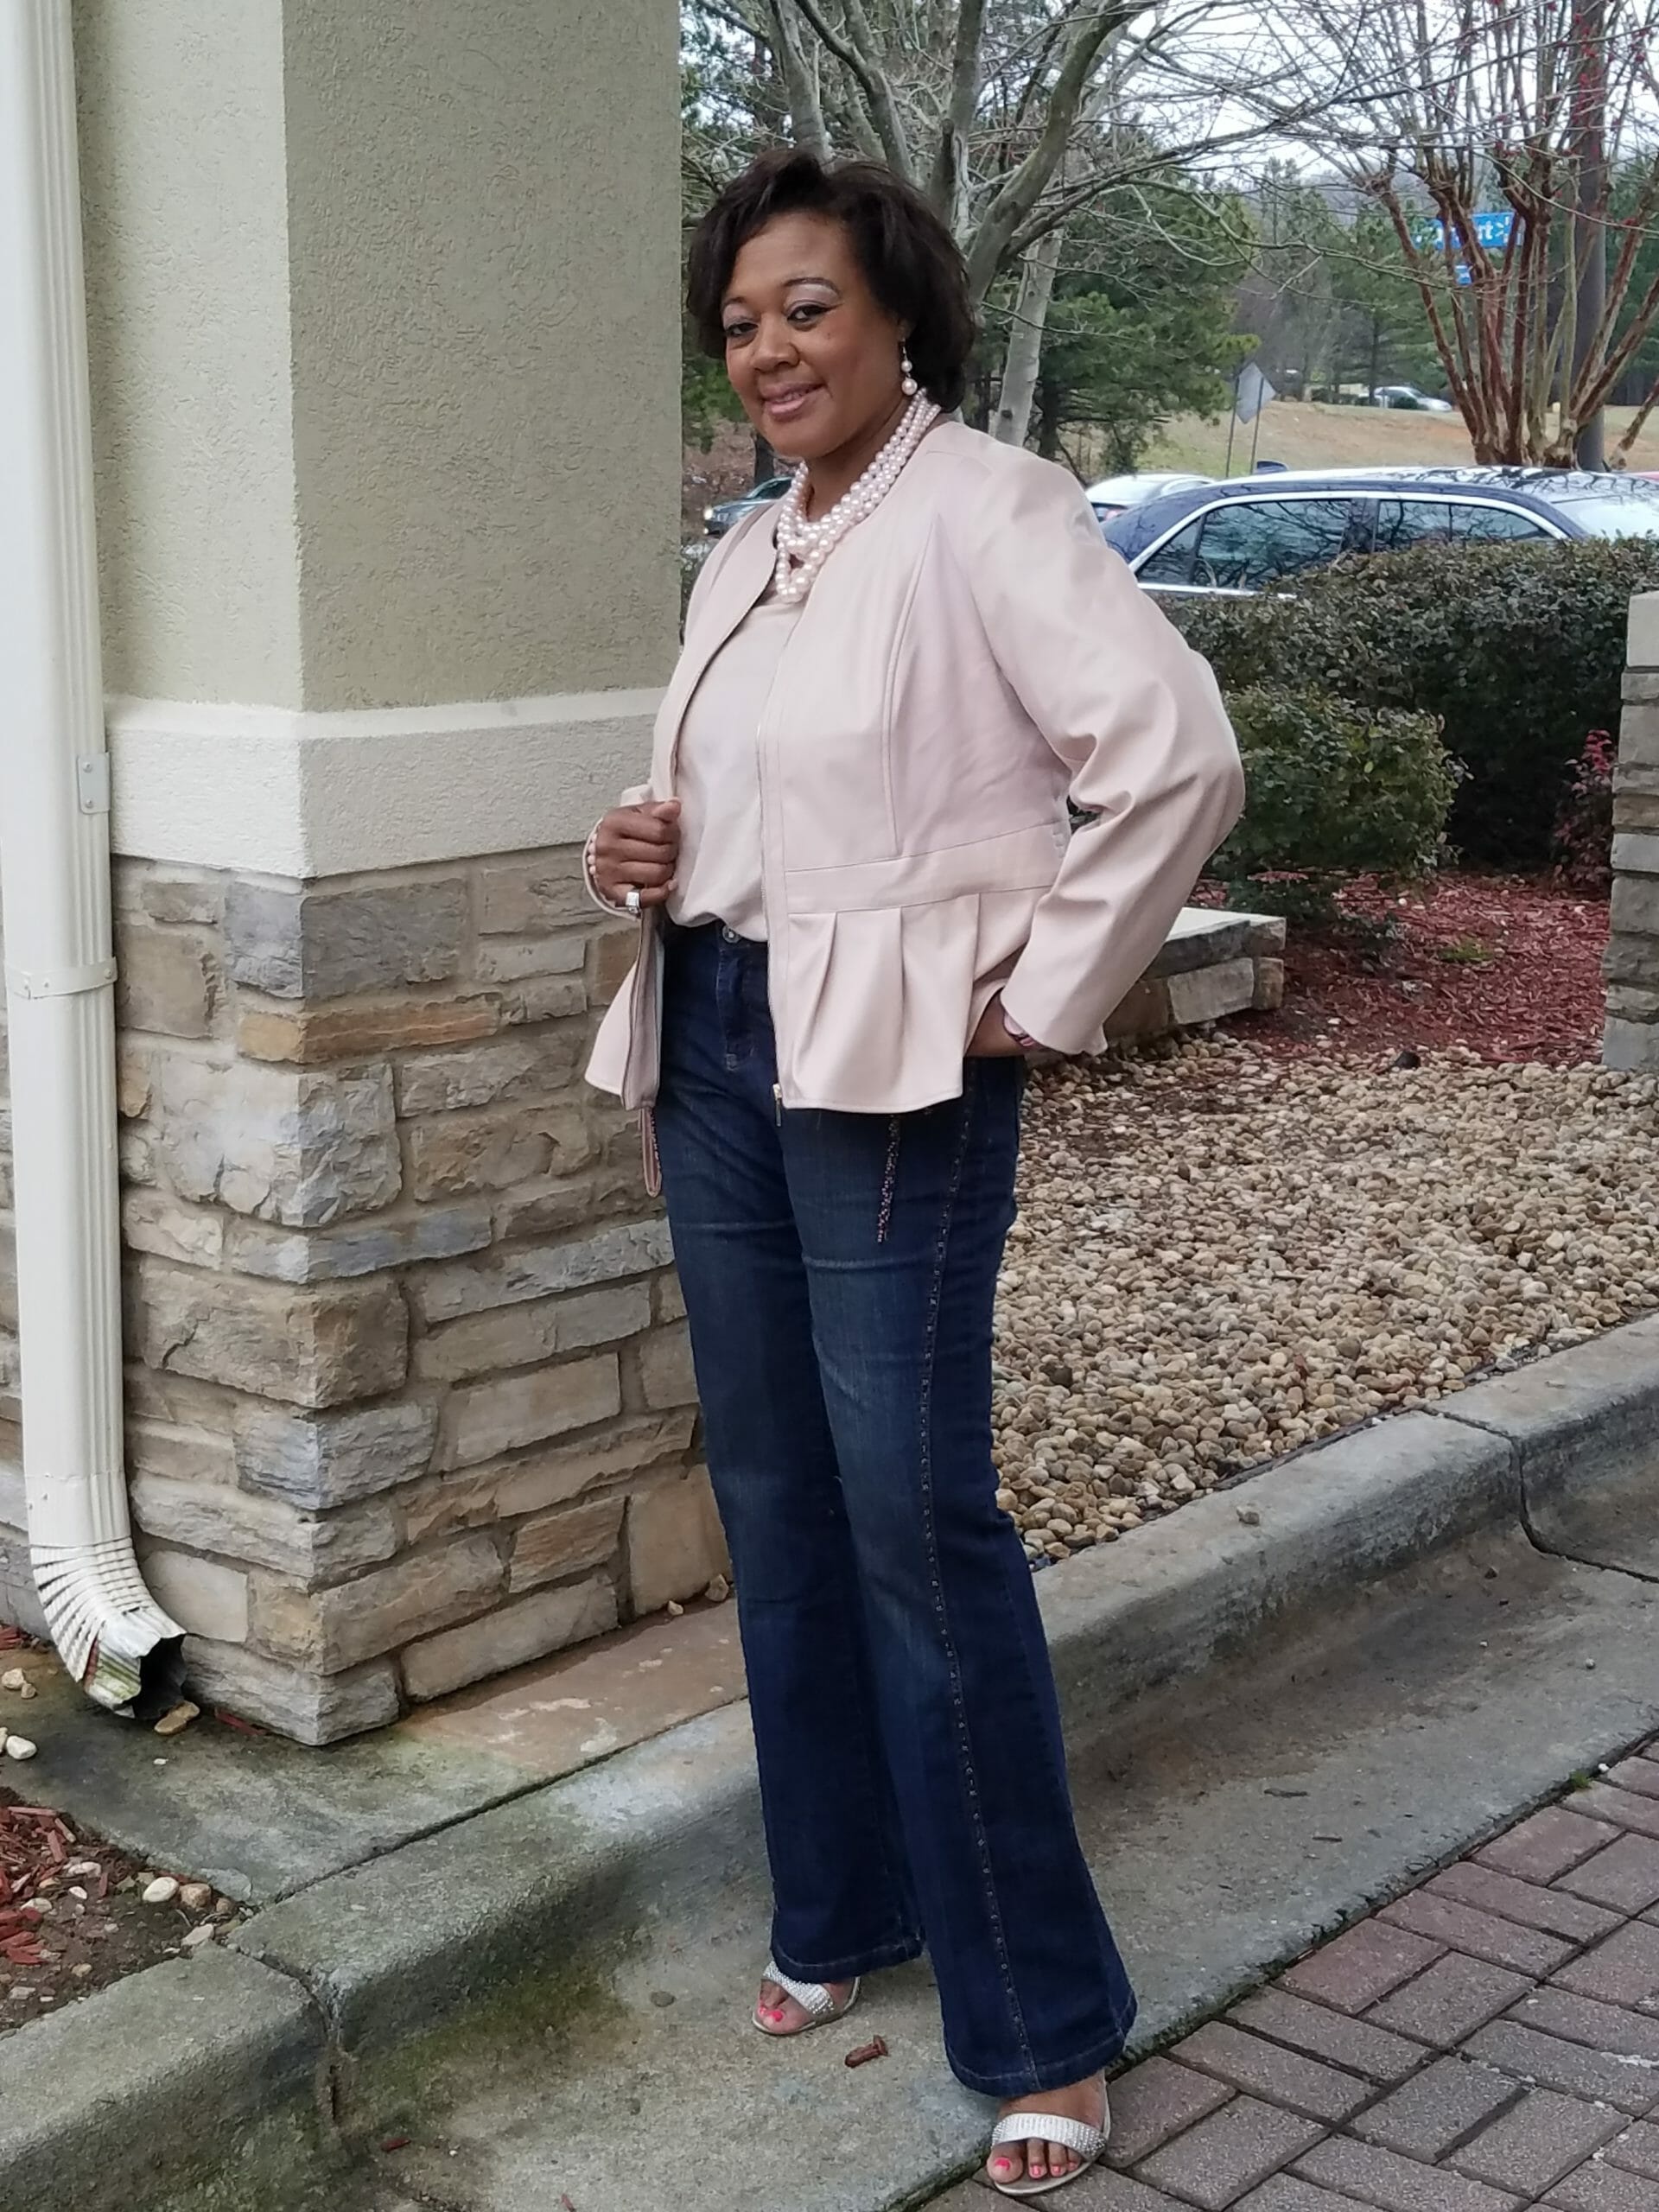 A Midnight Velvet customer by a rock column, in a blush top and peplum jacket set, jeans, sandals, and a pearl necklace.